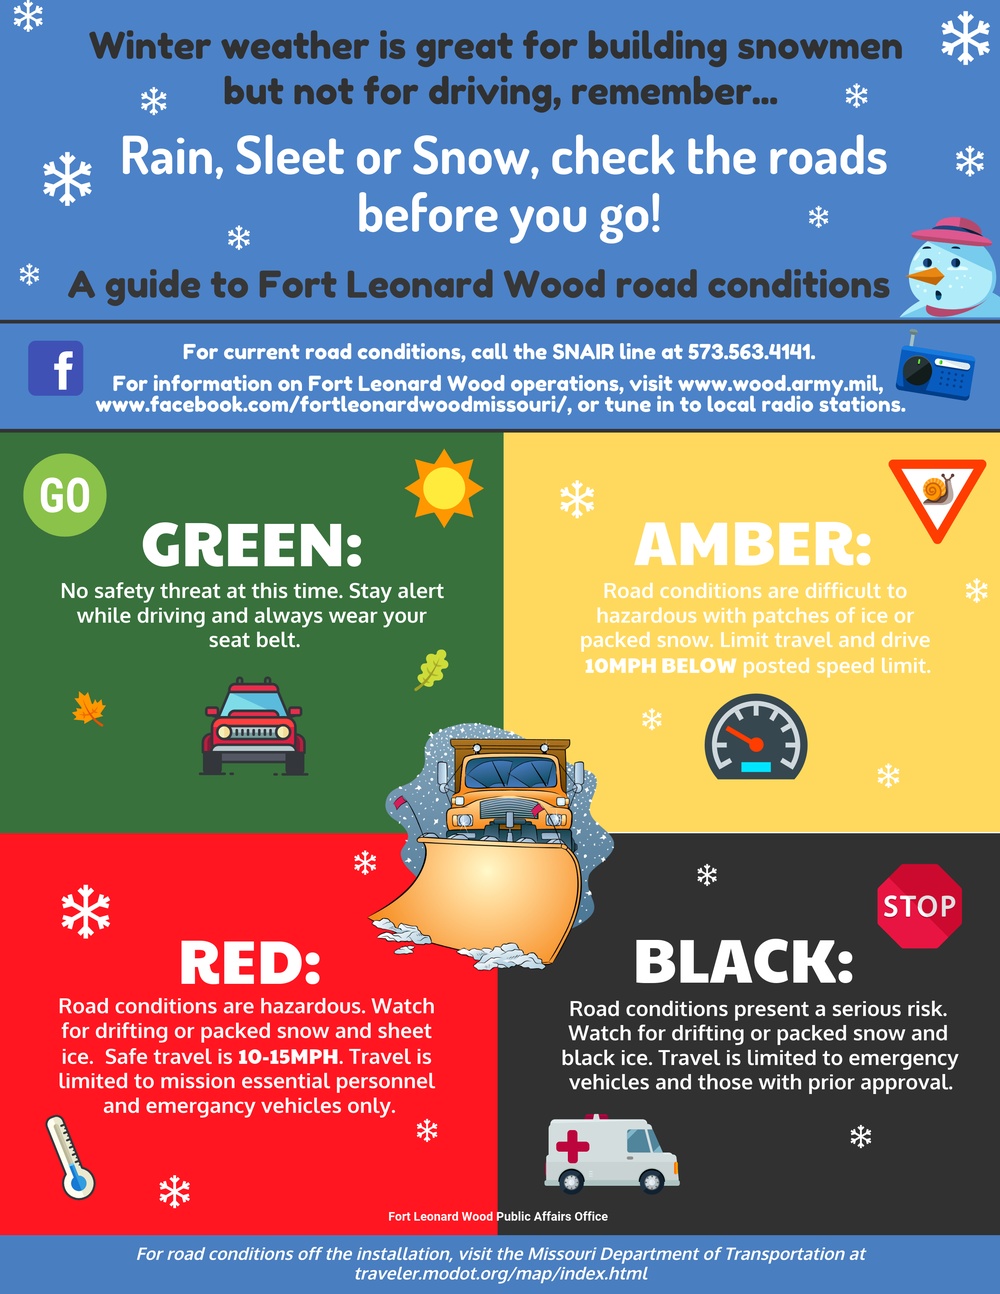 A guide to Fort Leonard Wood road conditions